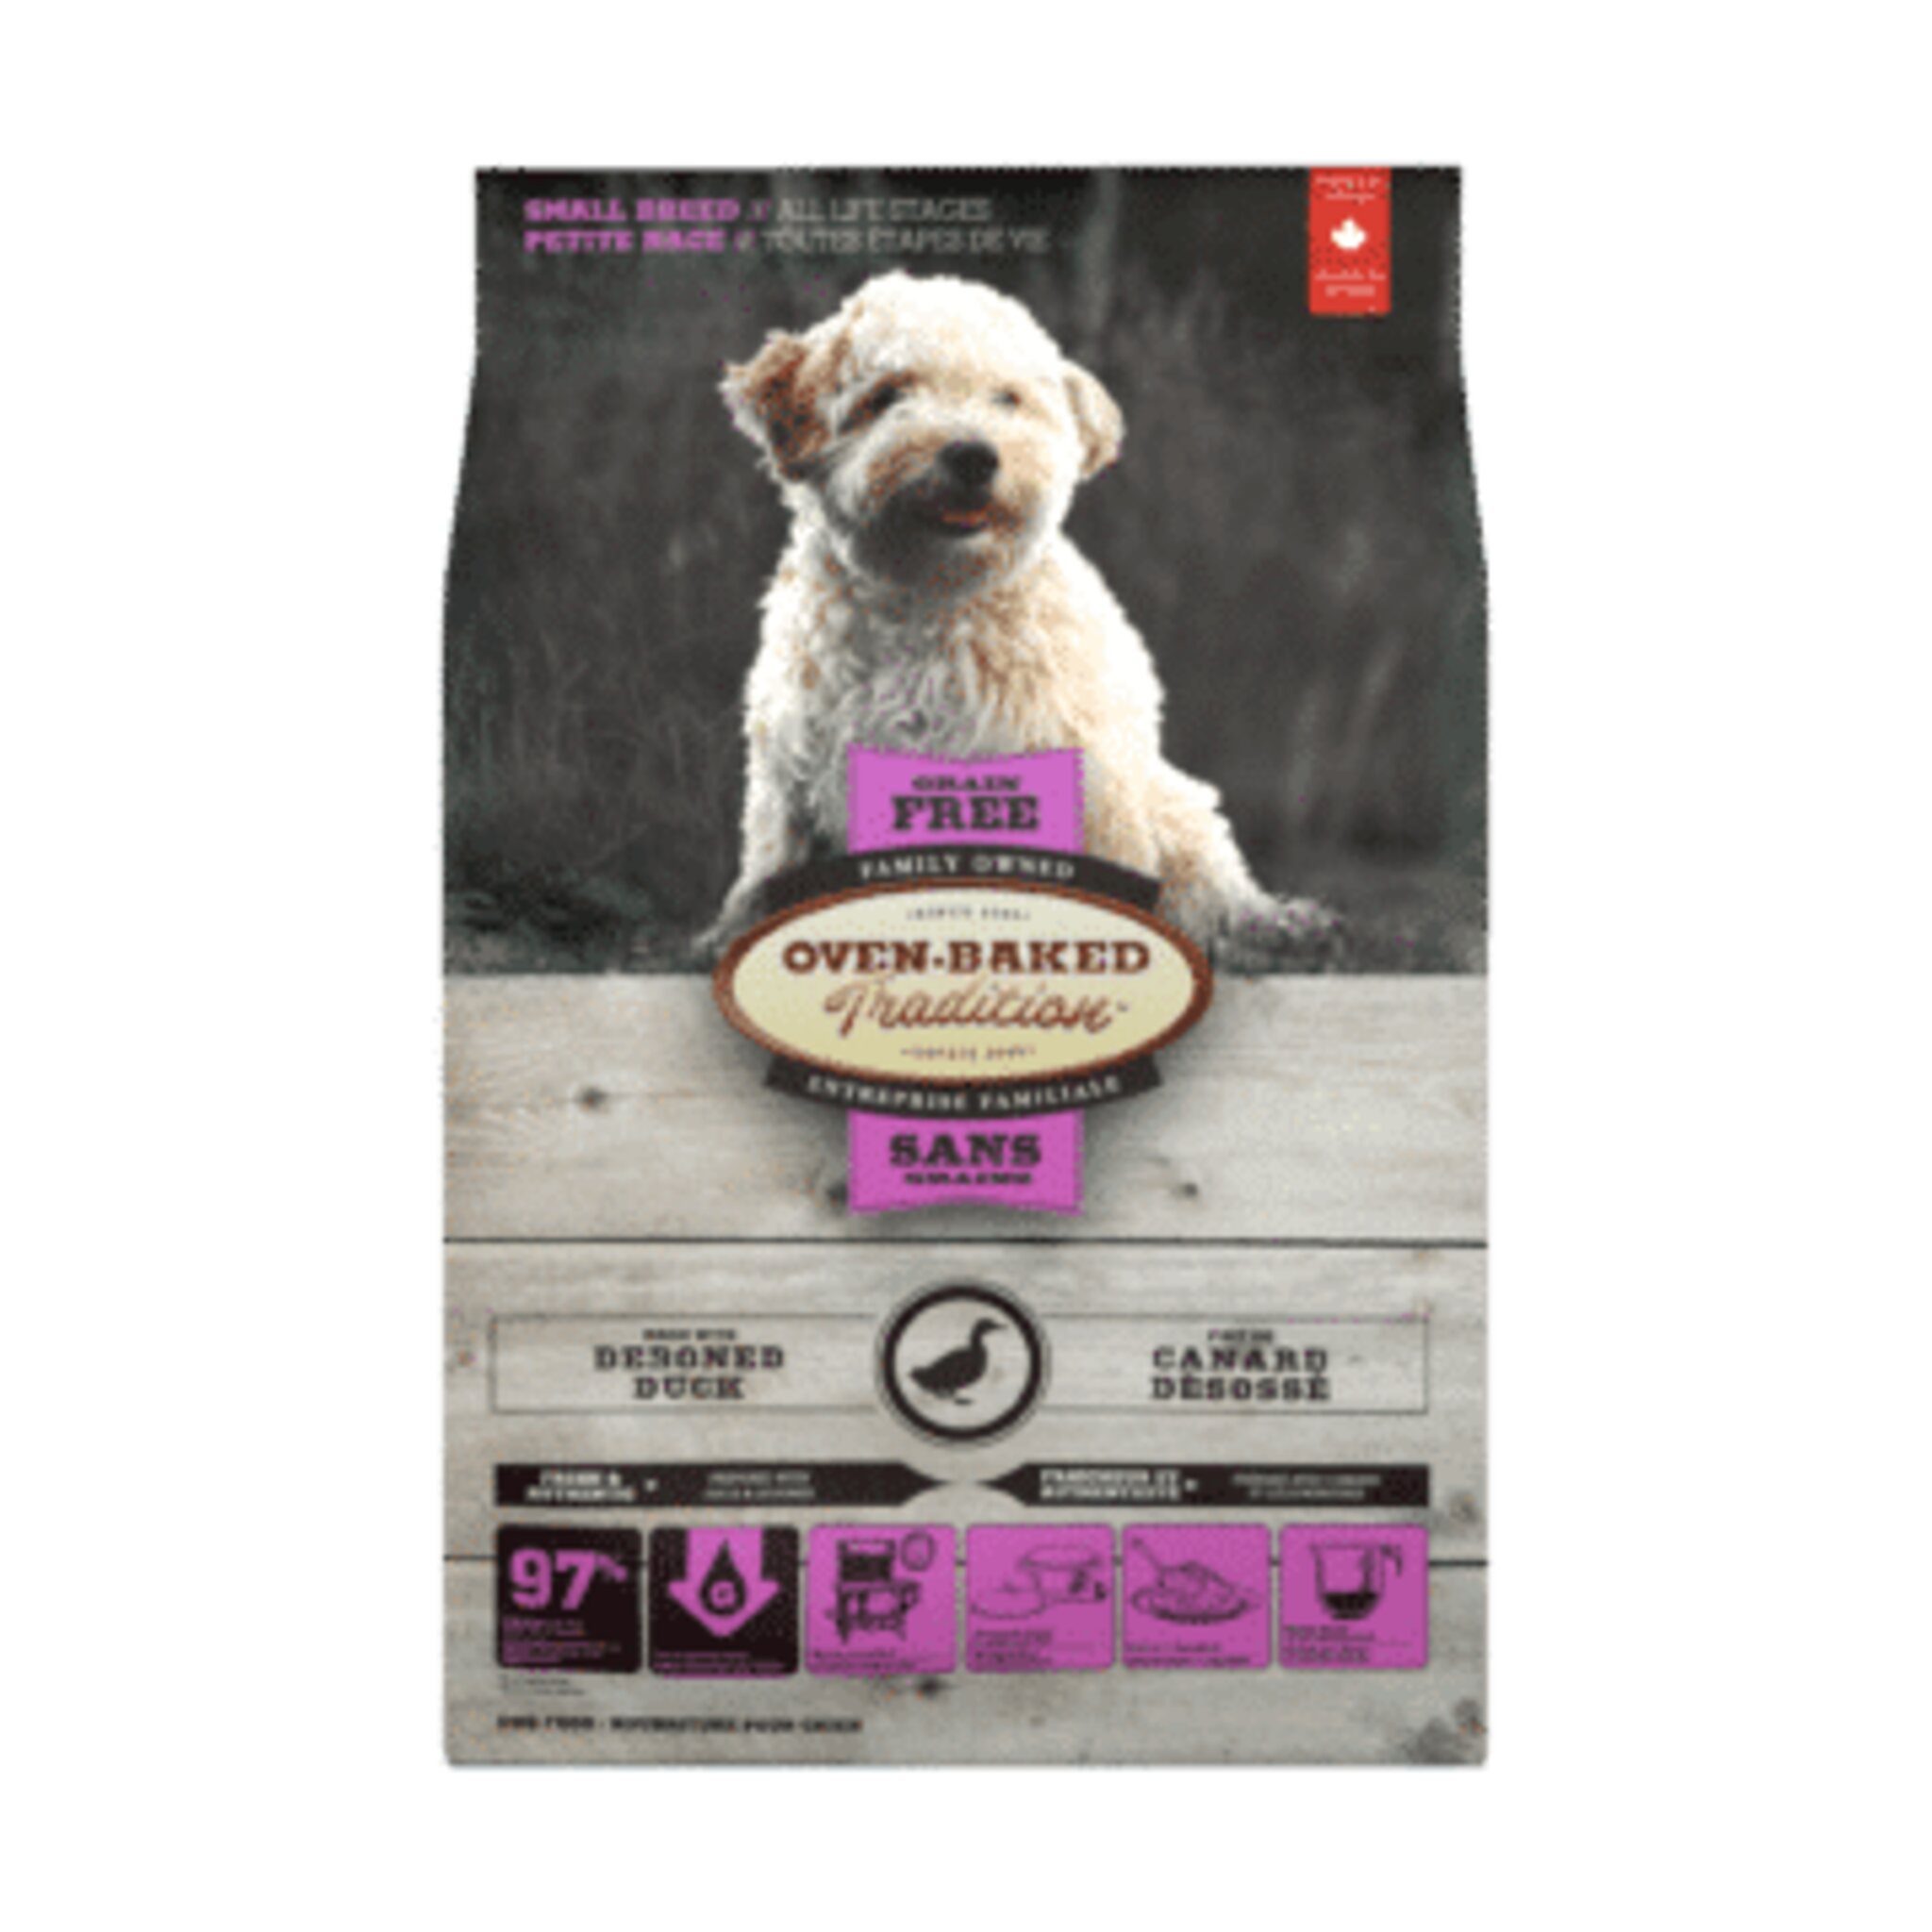 A bag of Oven-Baked Tradition small breed dog food, duck recipe, 5 lb.